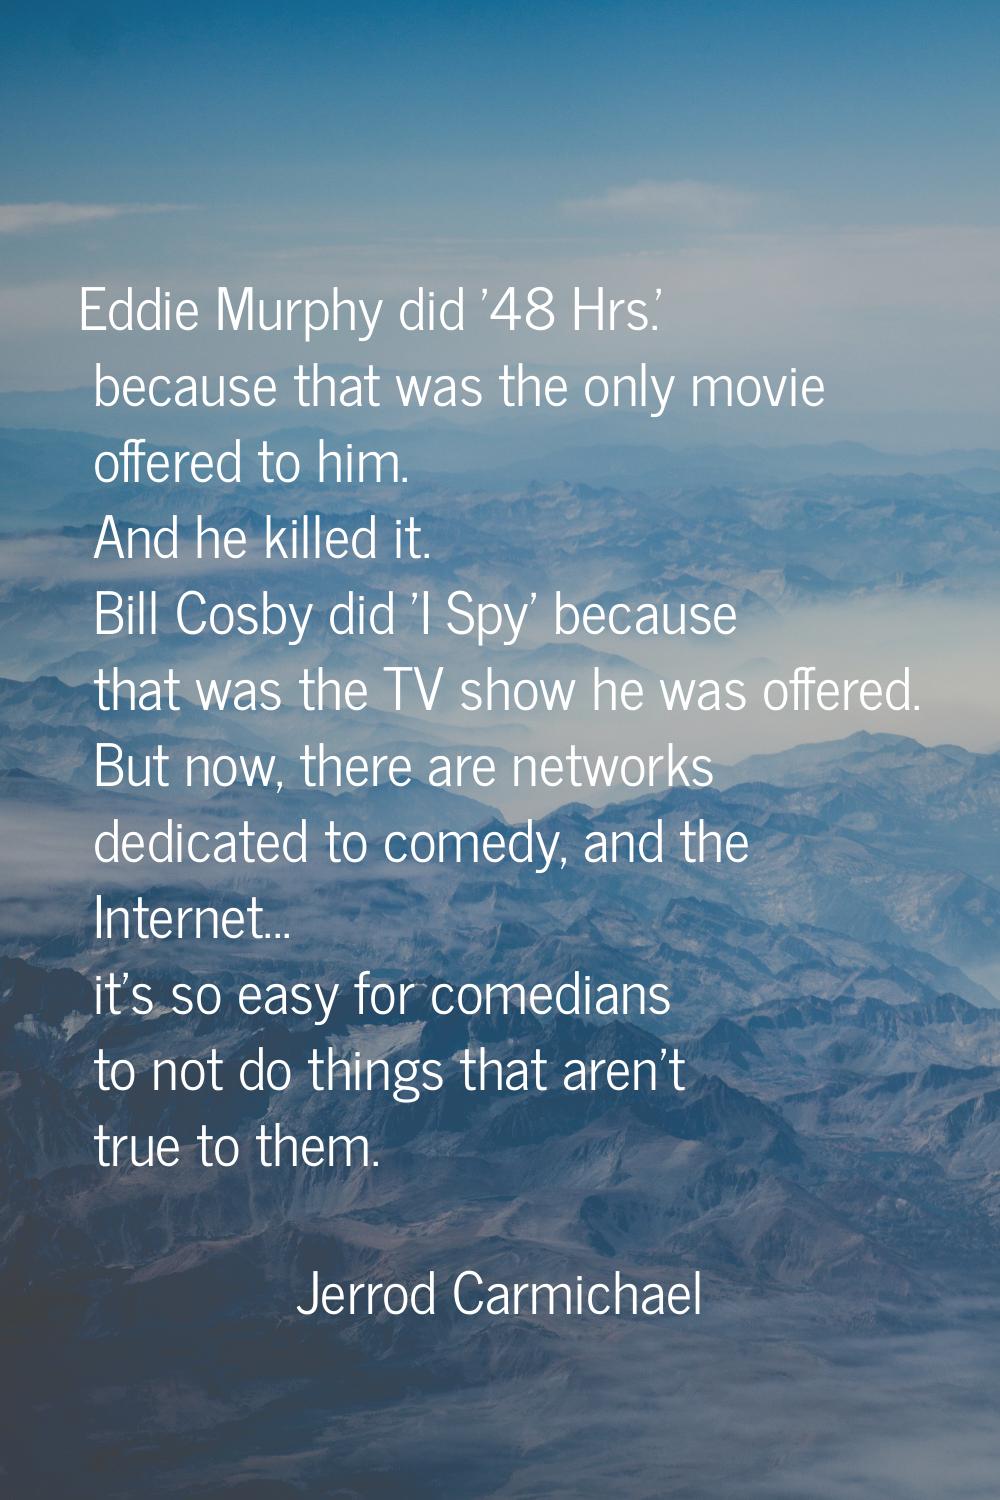 Eddie Murphy did '48 Hrs.' because that was the only movie offered to him. And he killed it. Bill C